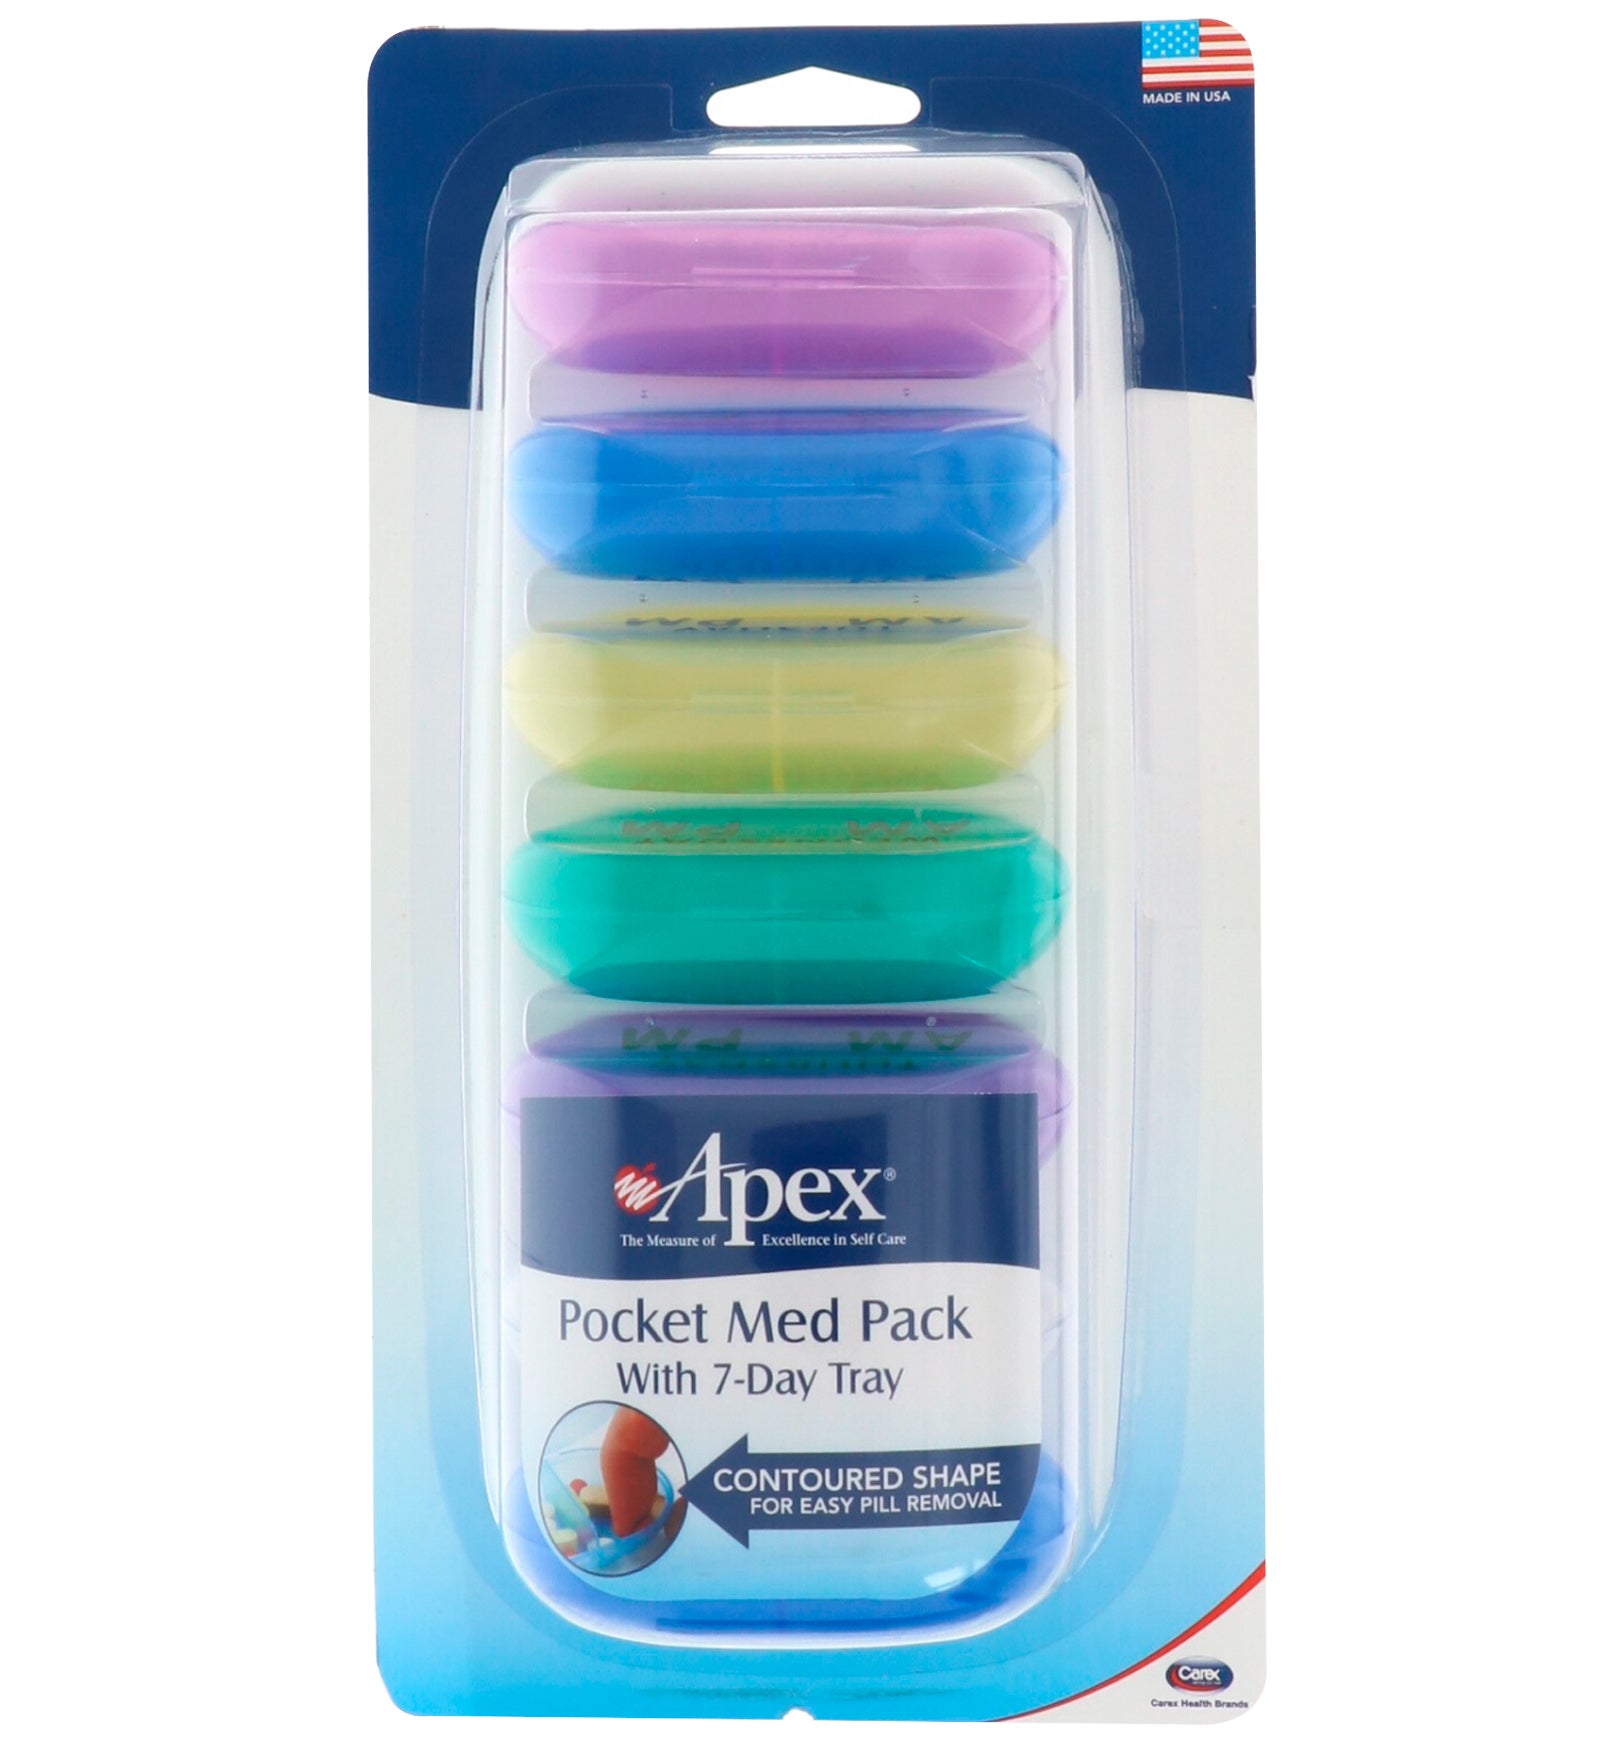 Apex, Pocket Med Pack with 7-Day Tray